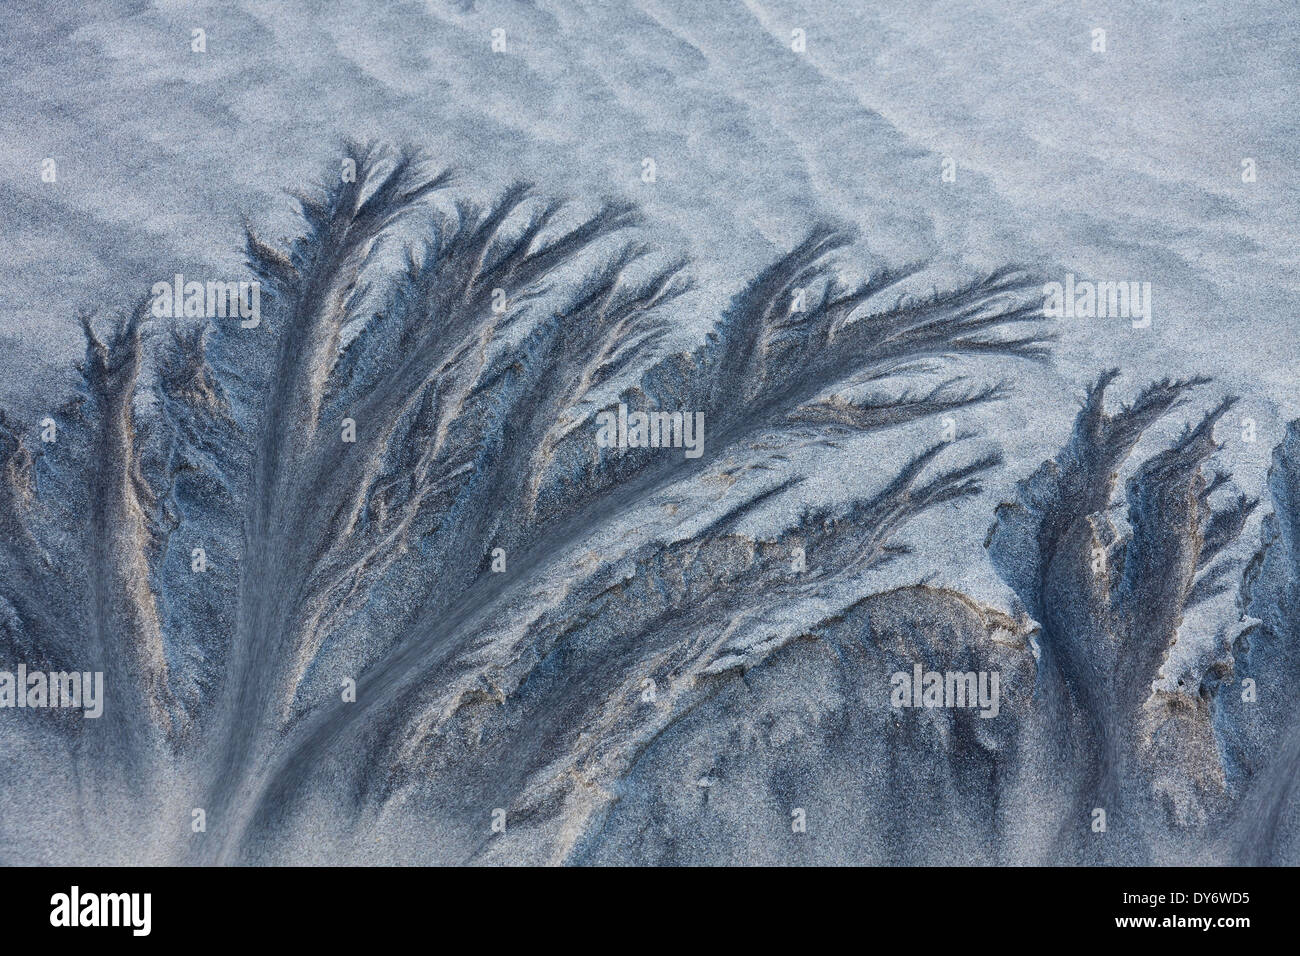 Abstract patterns in the sea sand from water erosion at beach along the coast in winter Stock Photo